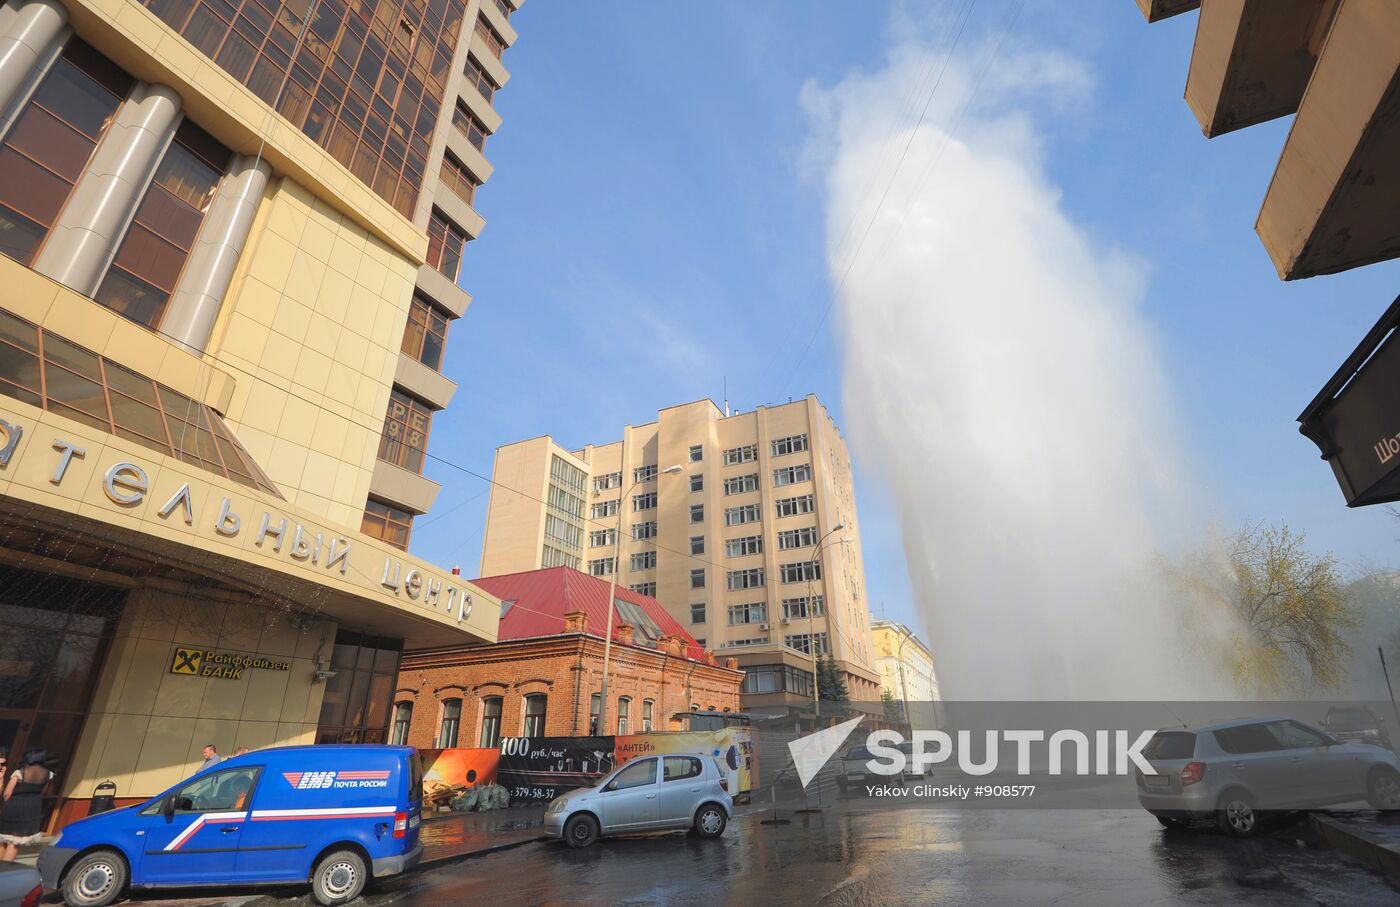 Utility accident in downtown Yekaterinburg